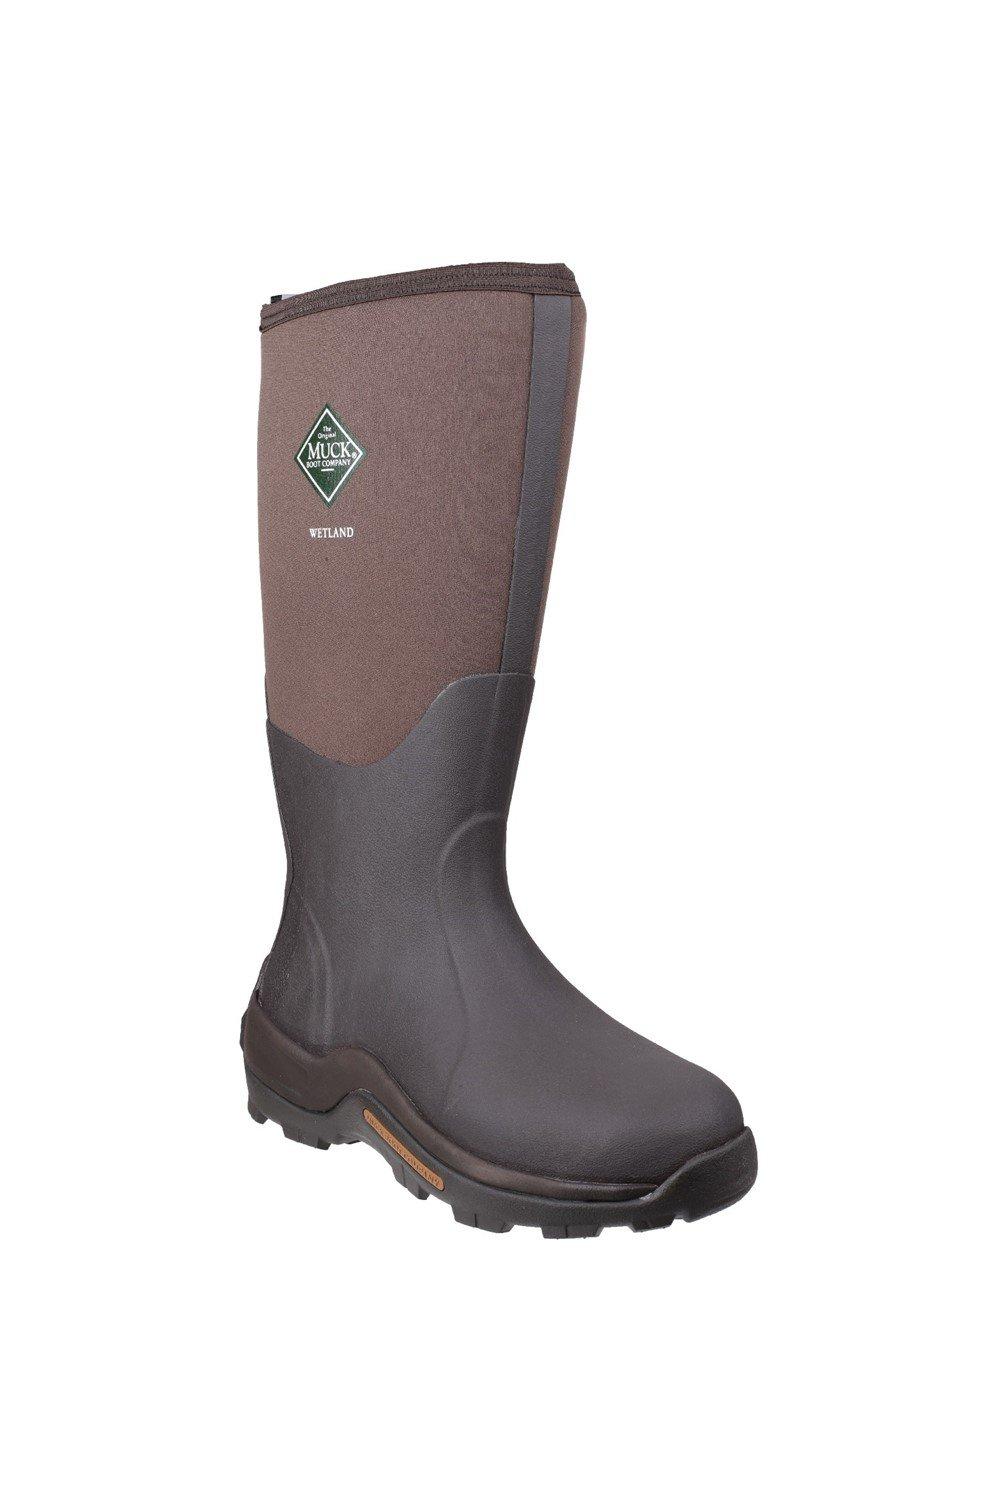 Muck Boots 'Wetland' Wellington Boots|Size: 4|brown